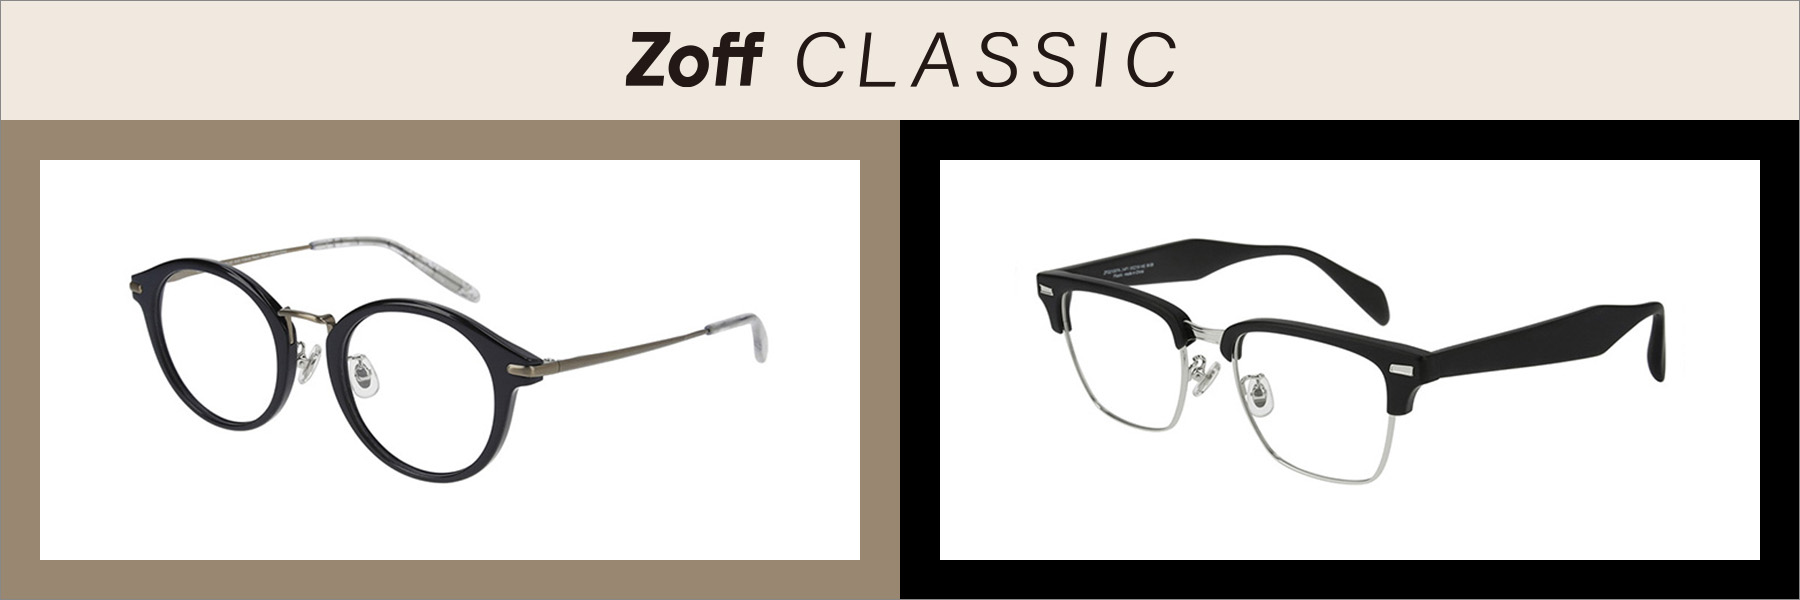 Zoff CLASSIC SUMMER COLLECTION